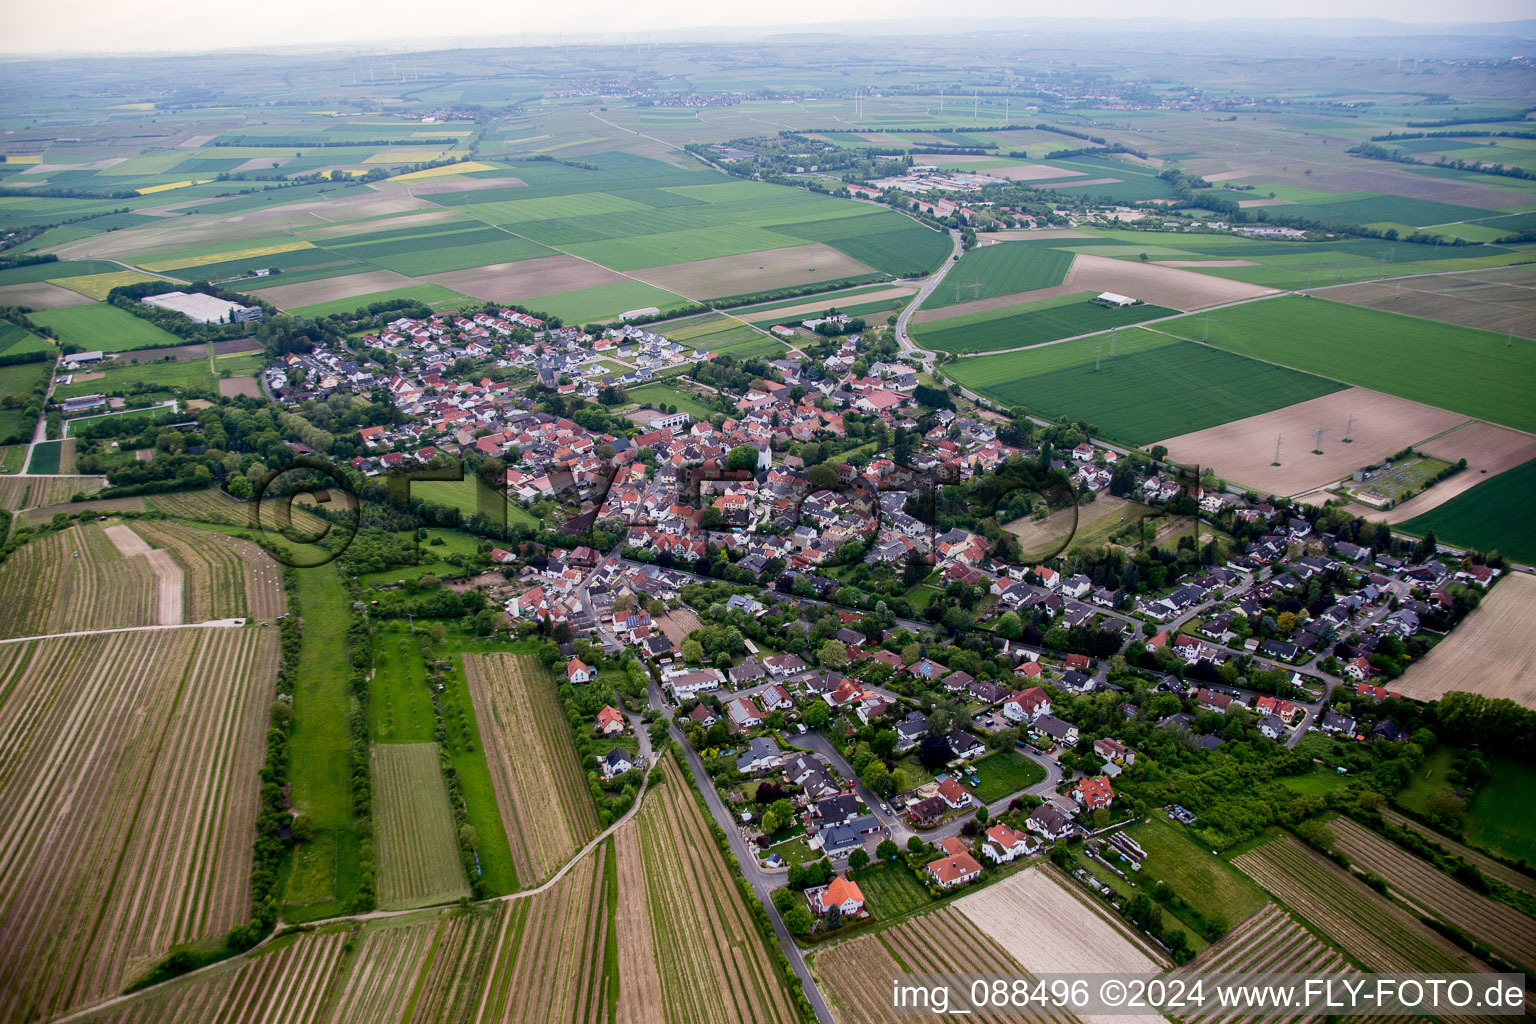 Aerial view of Dexheim in the state Rhineland-Palatinate, Germany